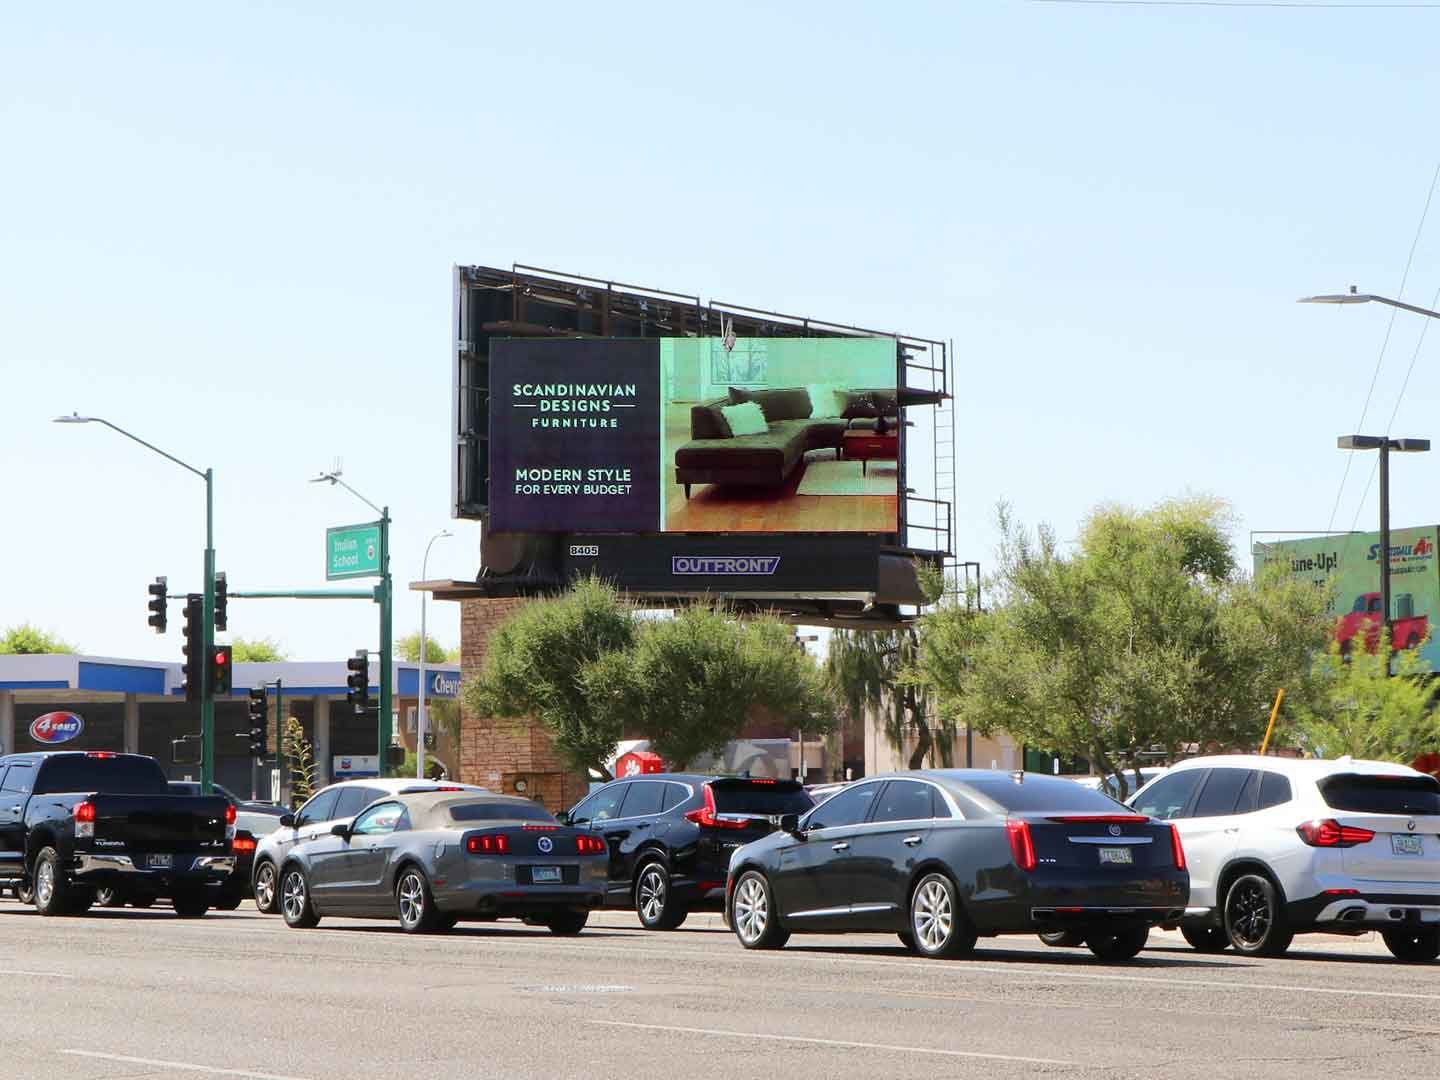 out of home billboard advertising phoenix